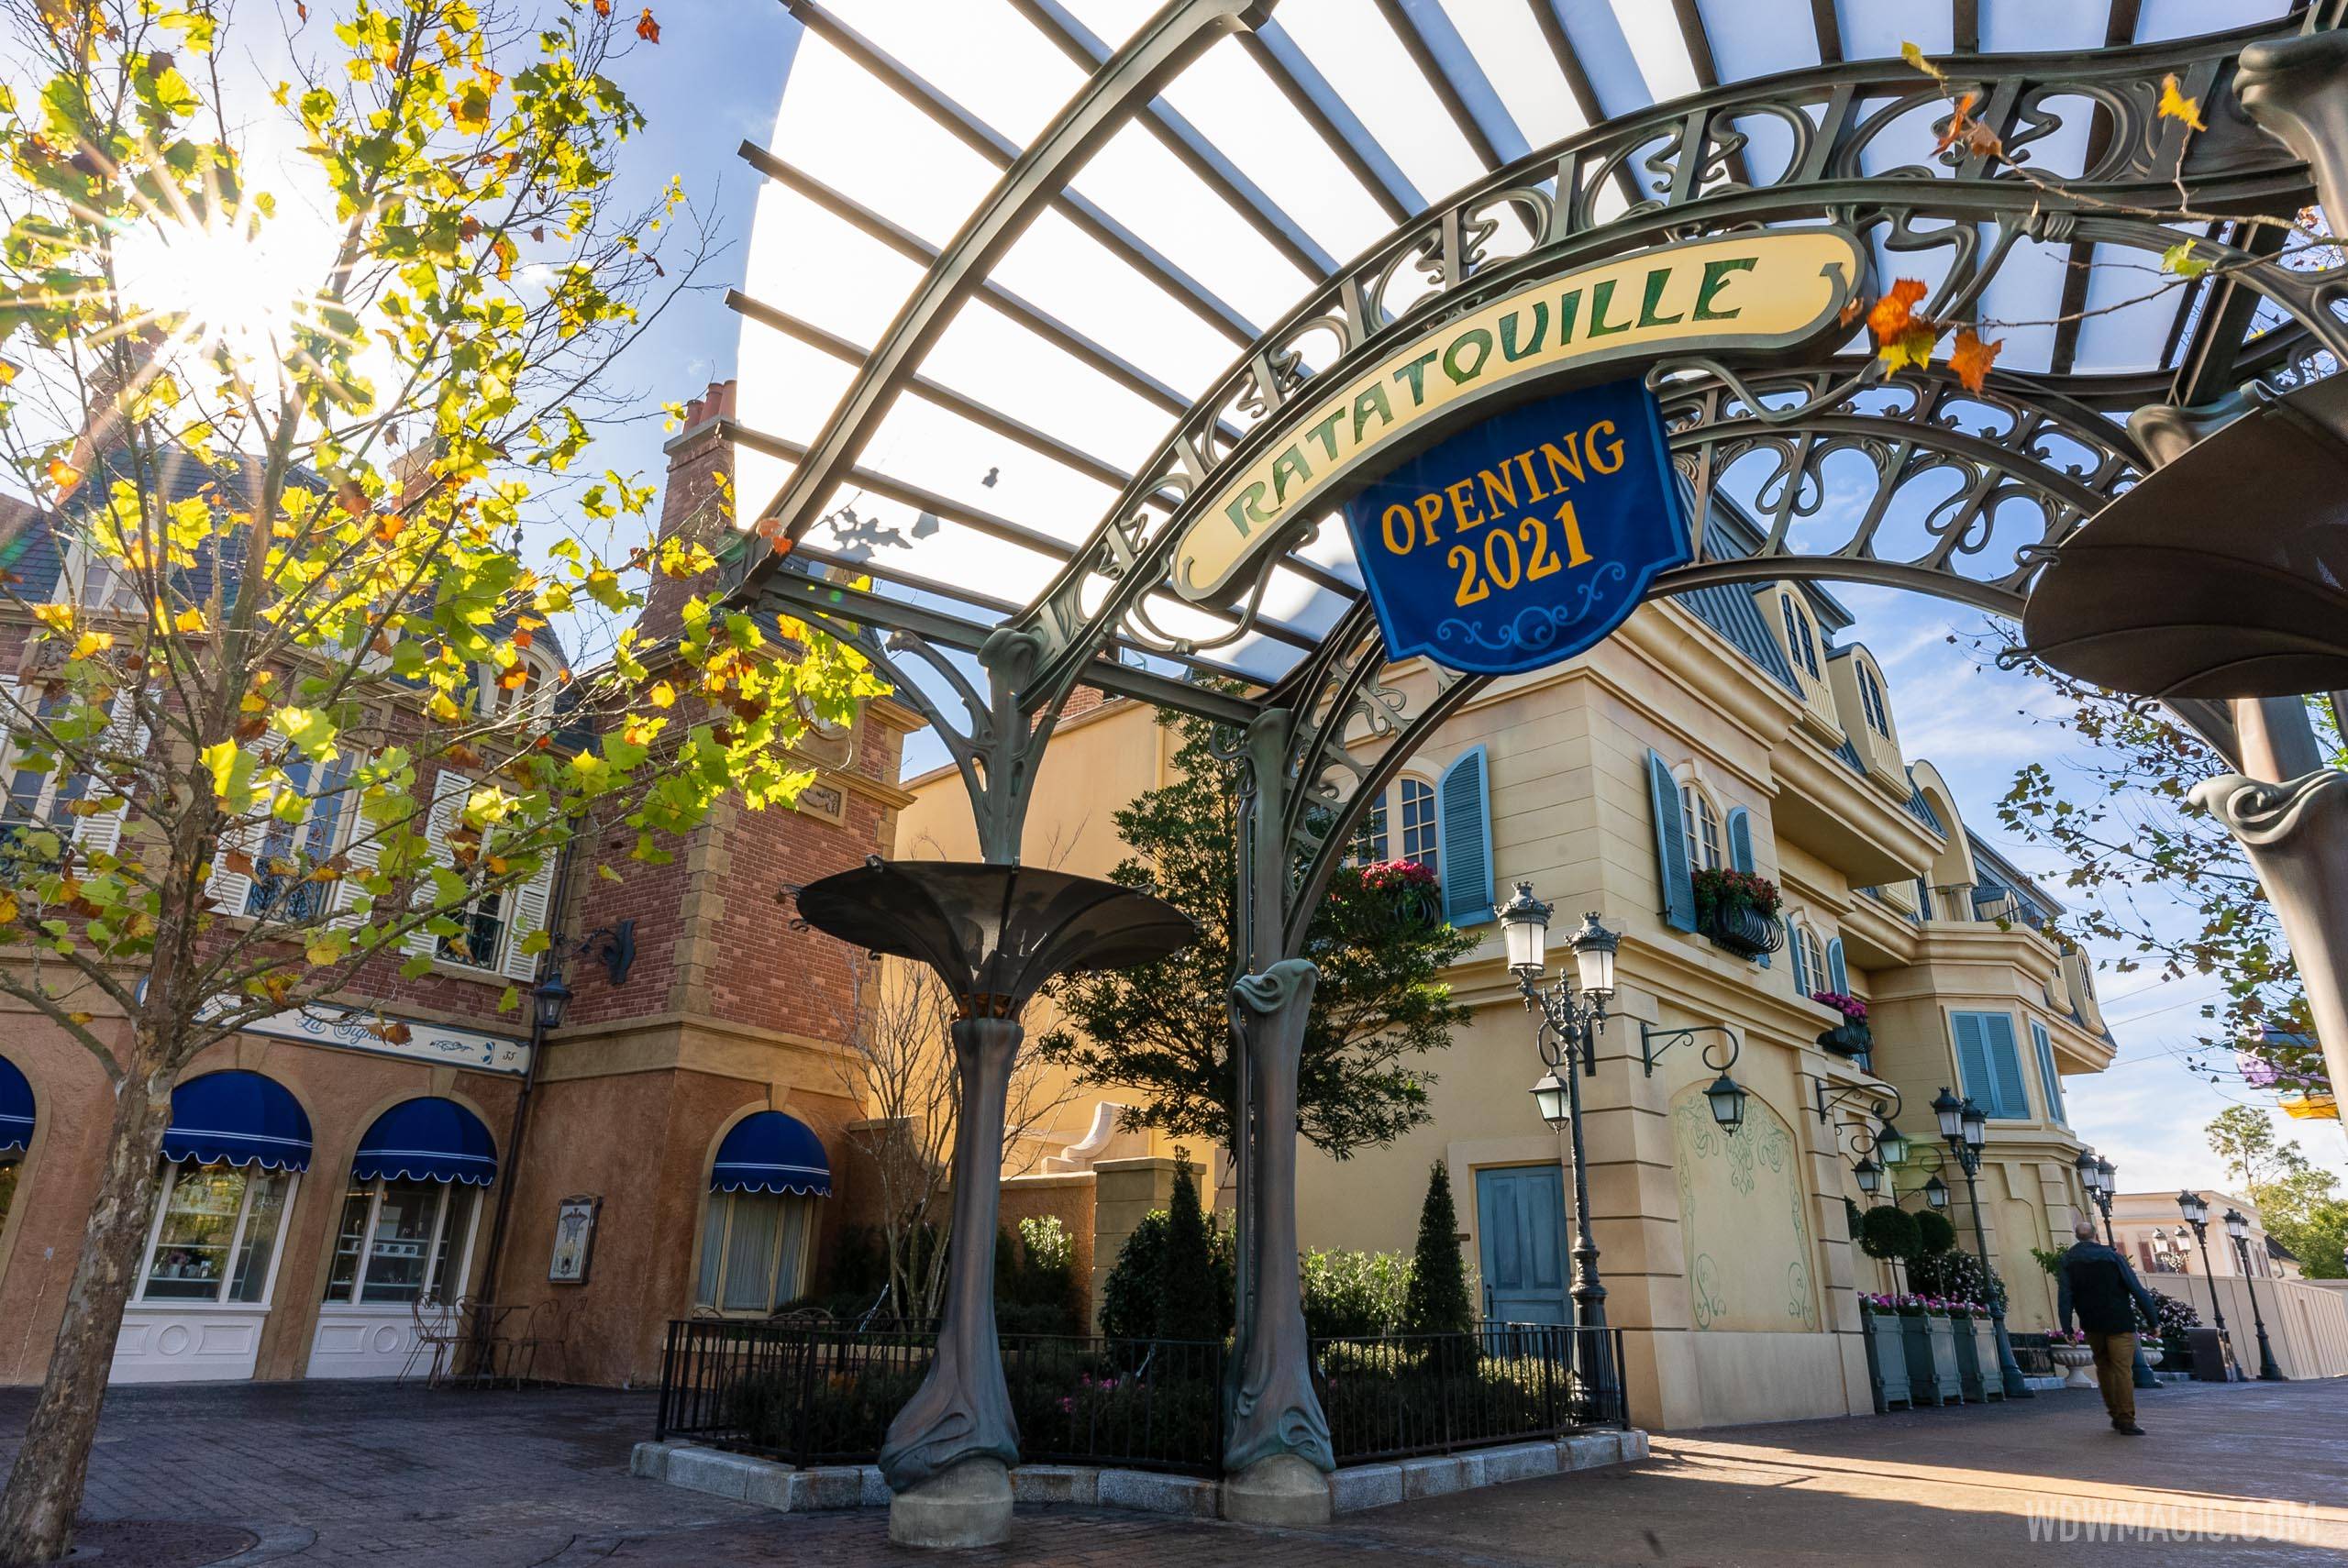 An opening date for Remy's Ratatouille Adventure was not given today